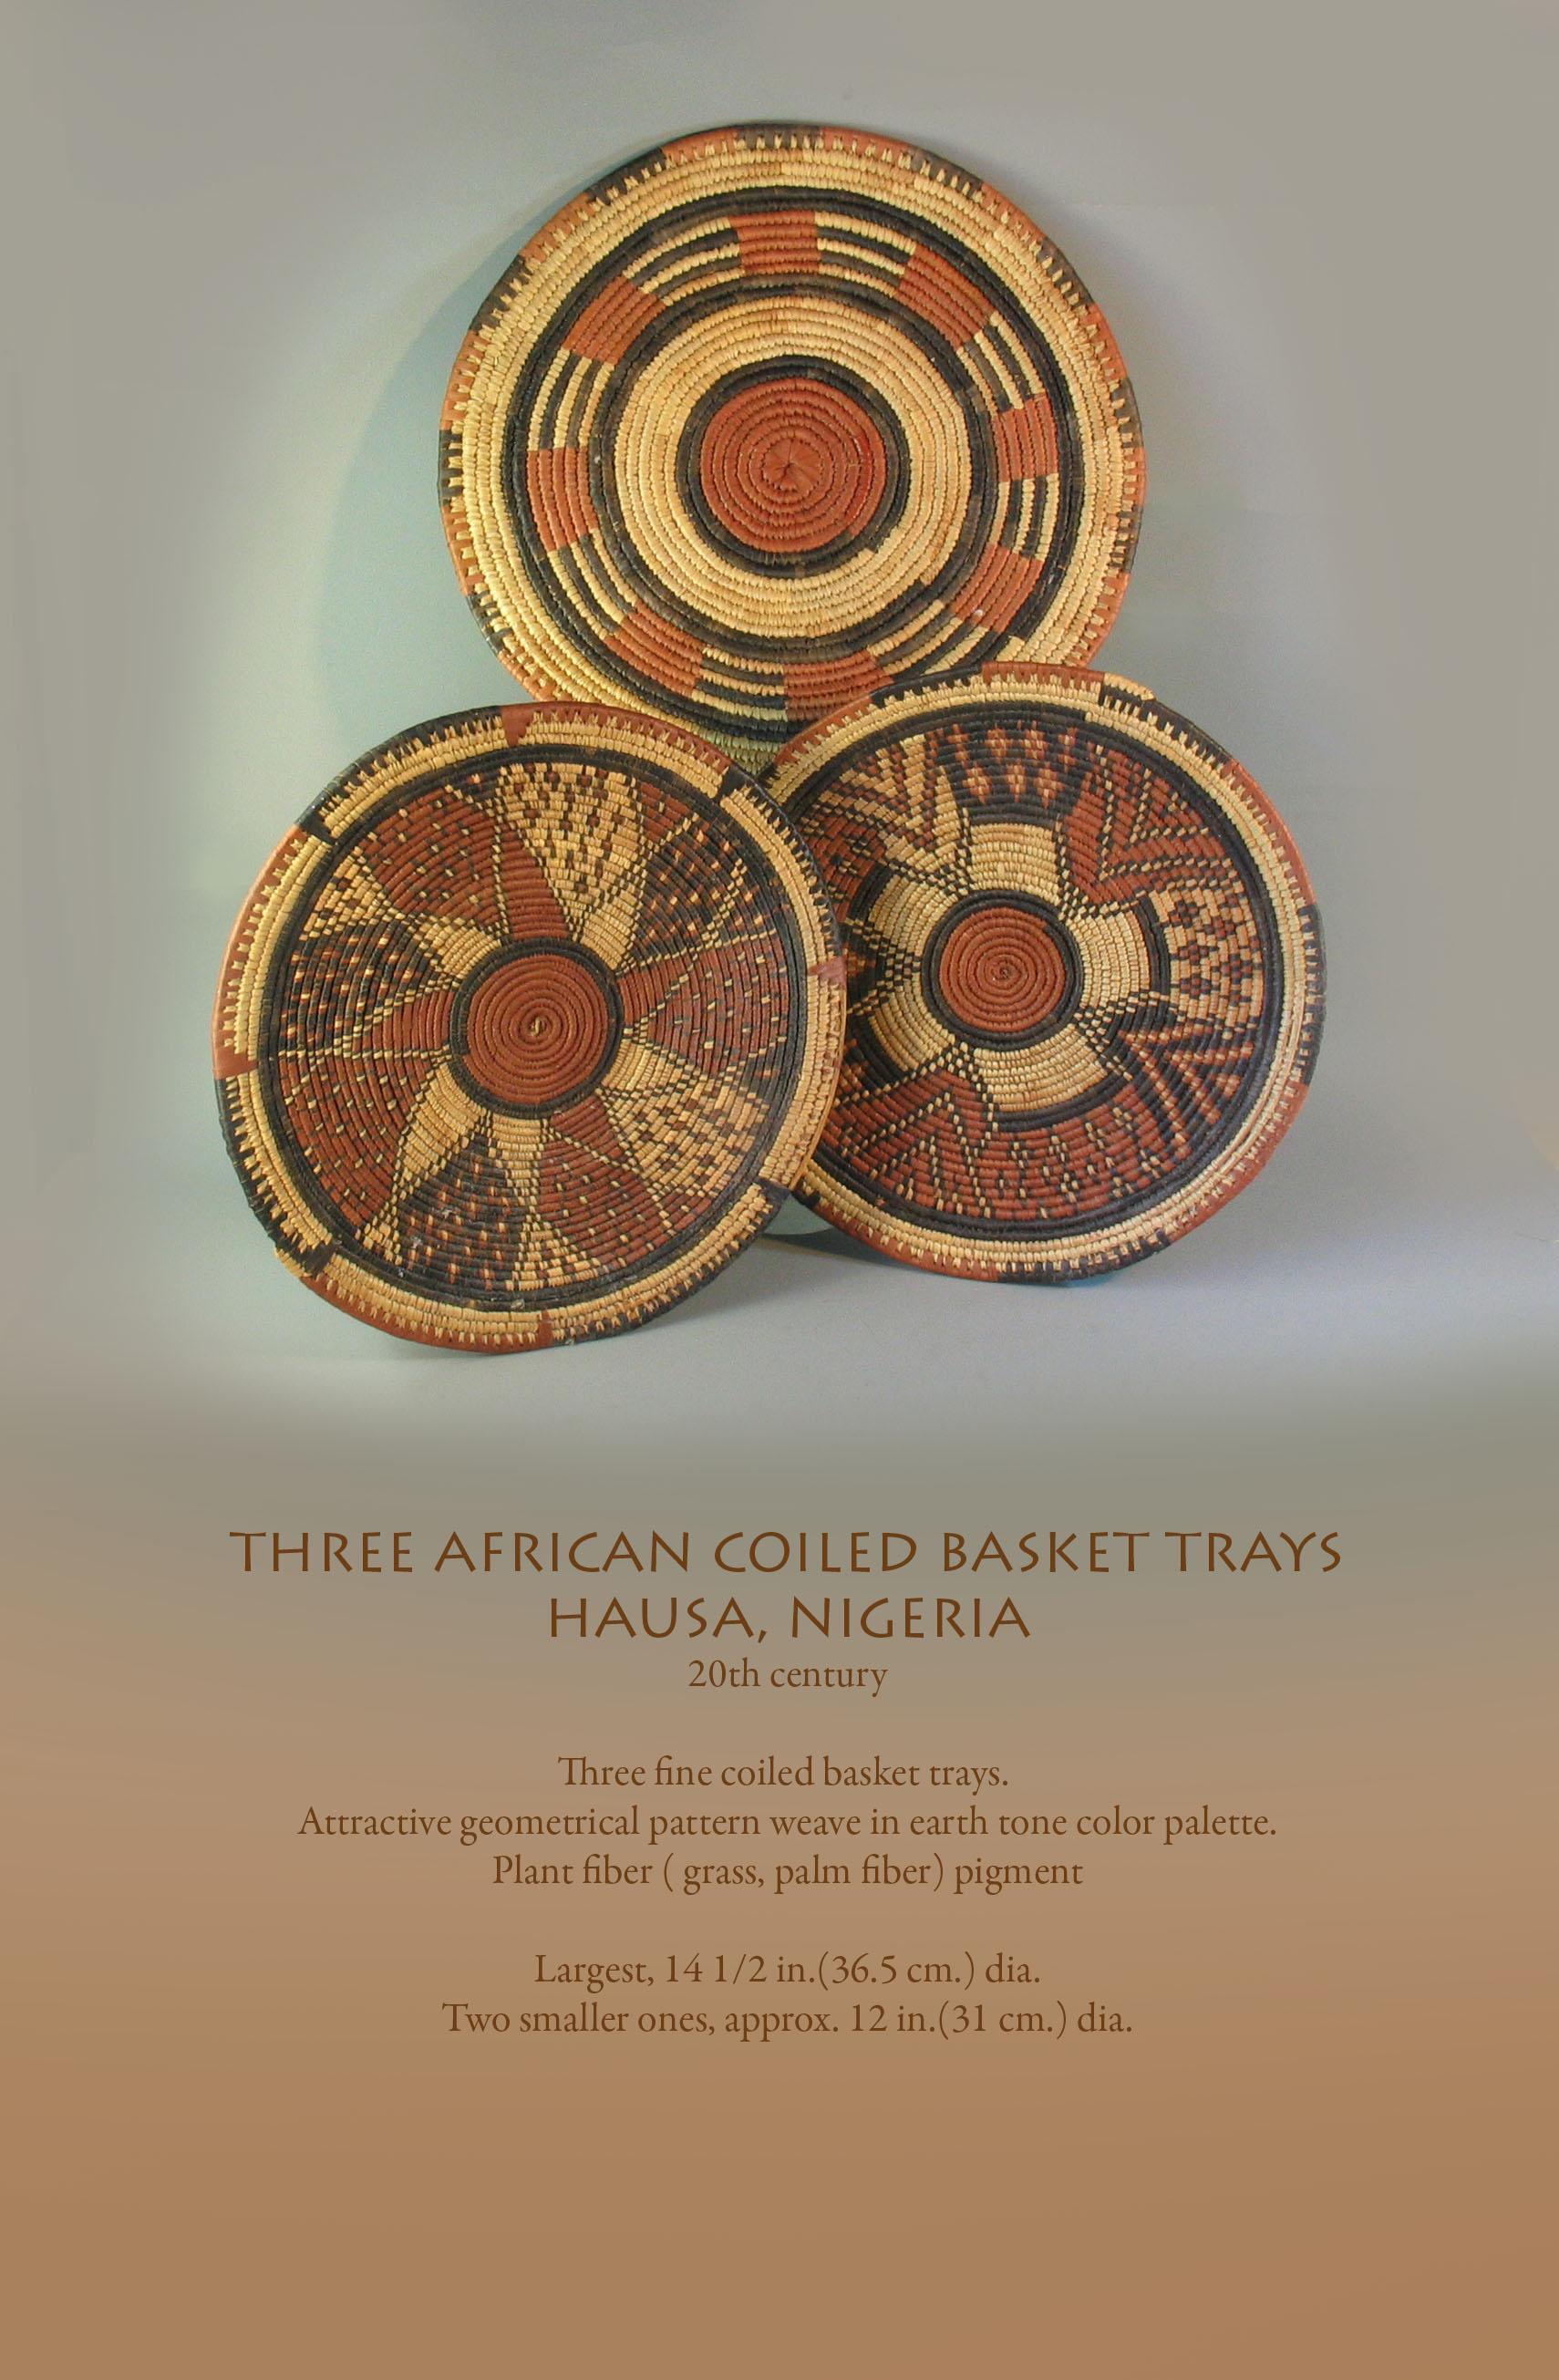 Three African coiled basket trays
Hausa, Nigeria
20th century.

Three fine coiled basket trays. 
Attractive geometrical pattern weave in earth tone color palette.
Plant fiber (grass, palm fiber) pigment

Measures: Largest, 14 1/2